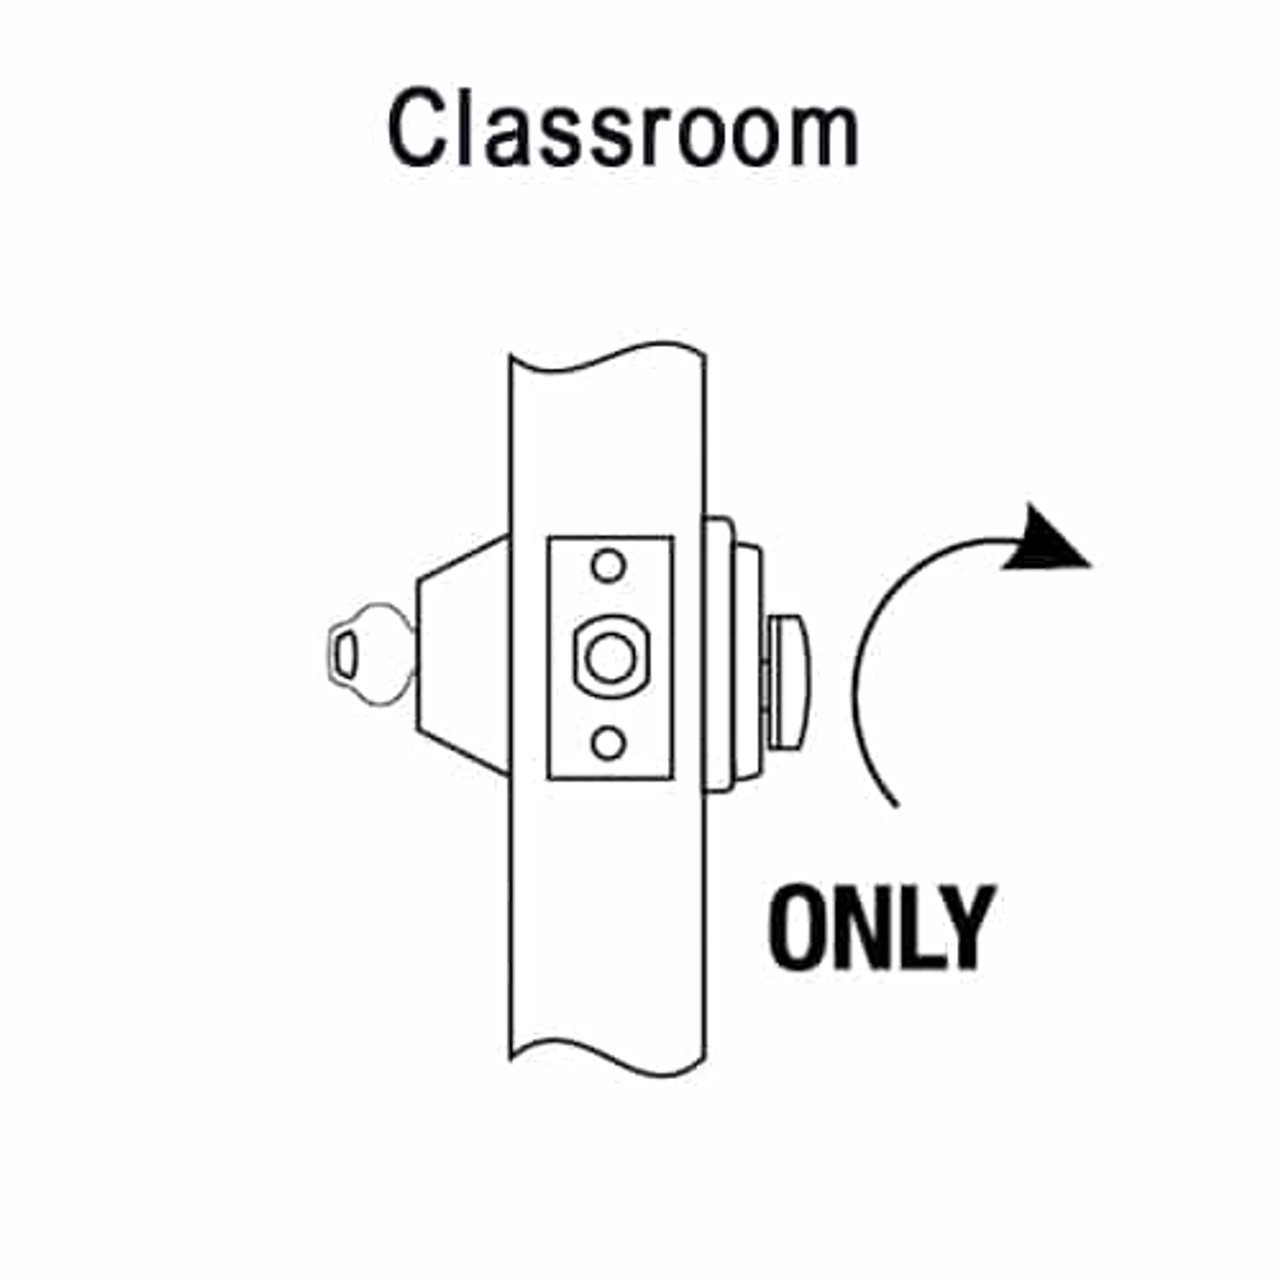 DL3217-606-CL7 Corbin DL3200 Series Classroom Cylindrical Deadlocks with Single Cylinder in Satin Brass